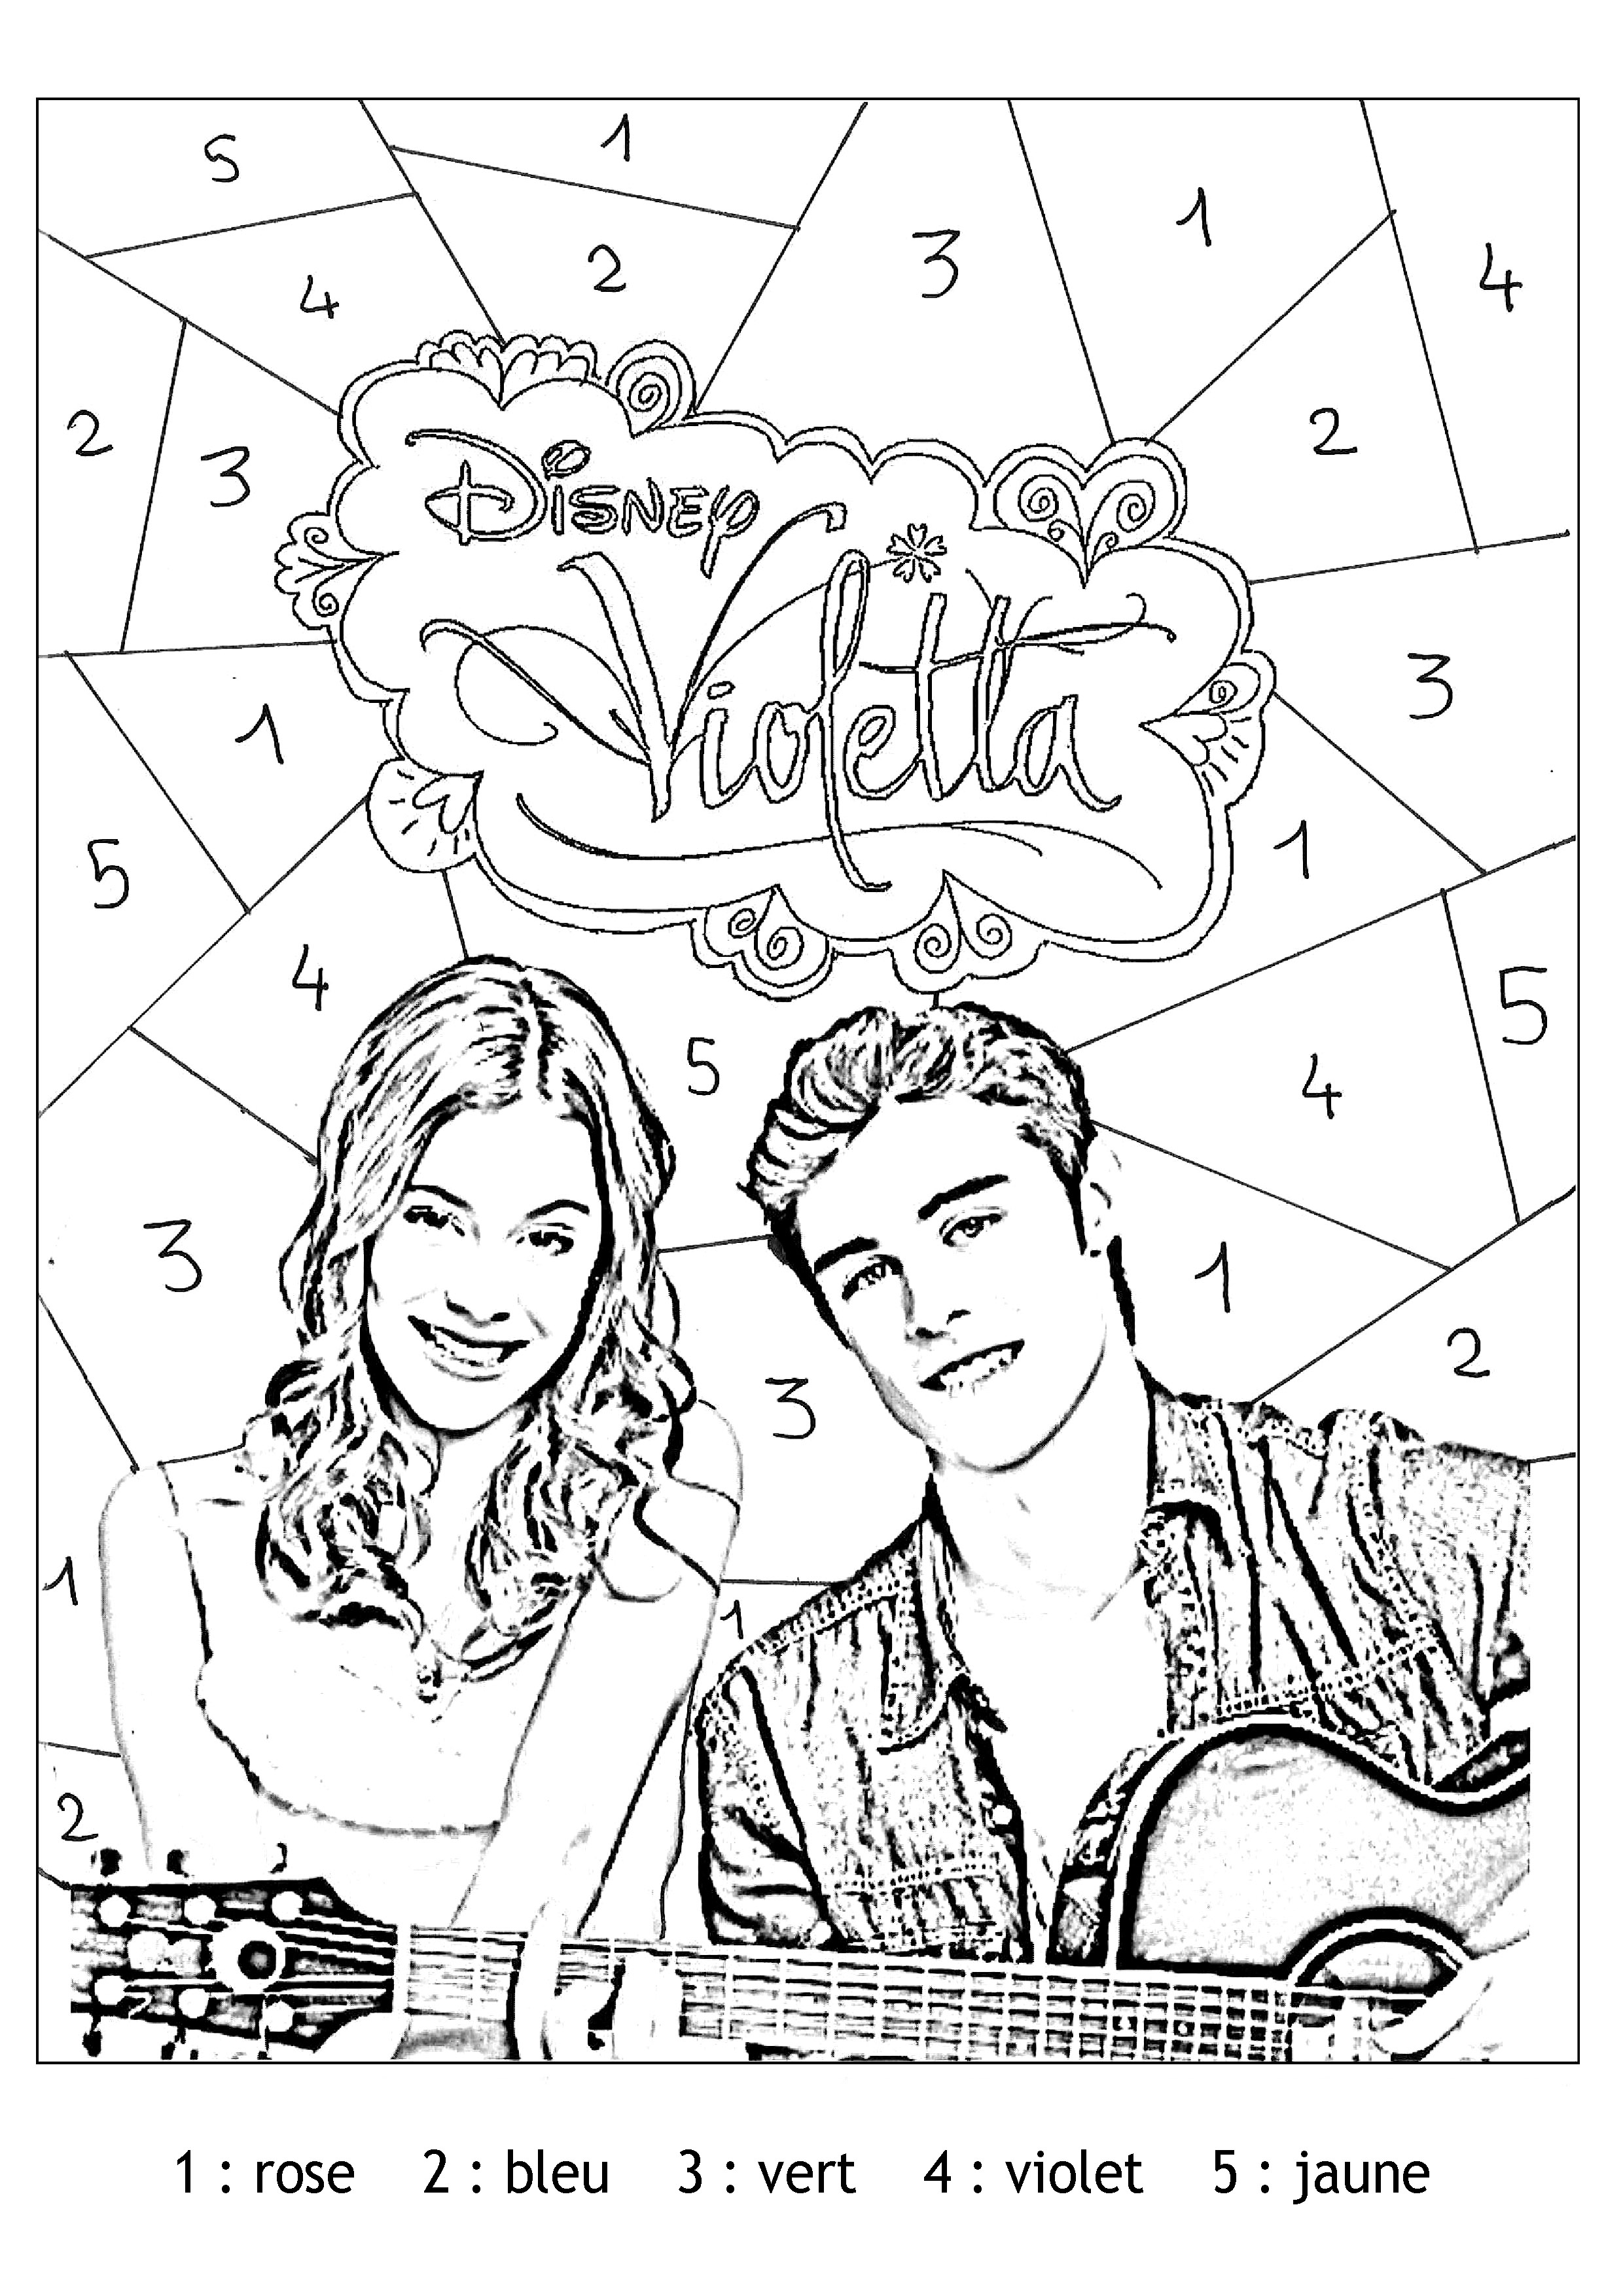 Simple Violetta coloring page to print and color for free